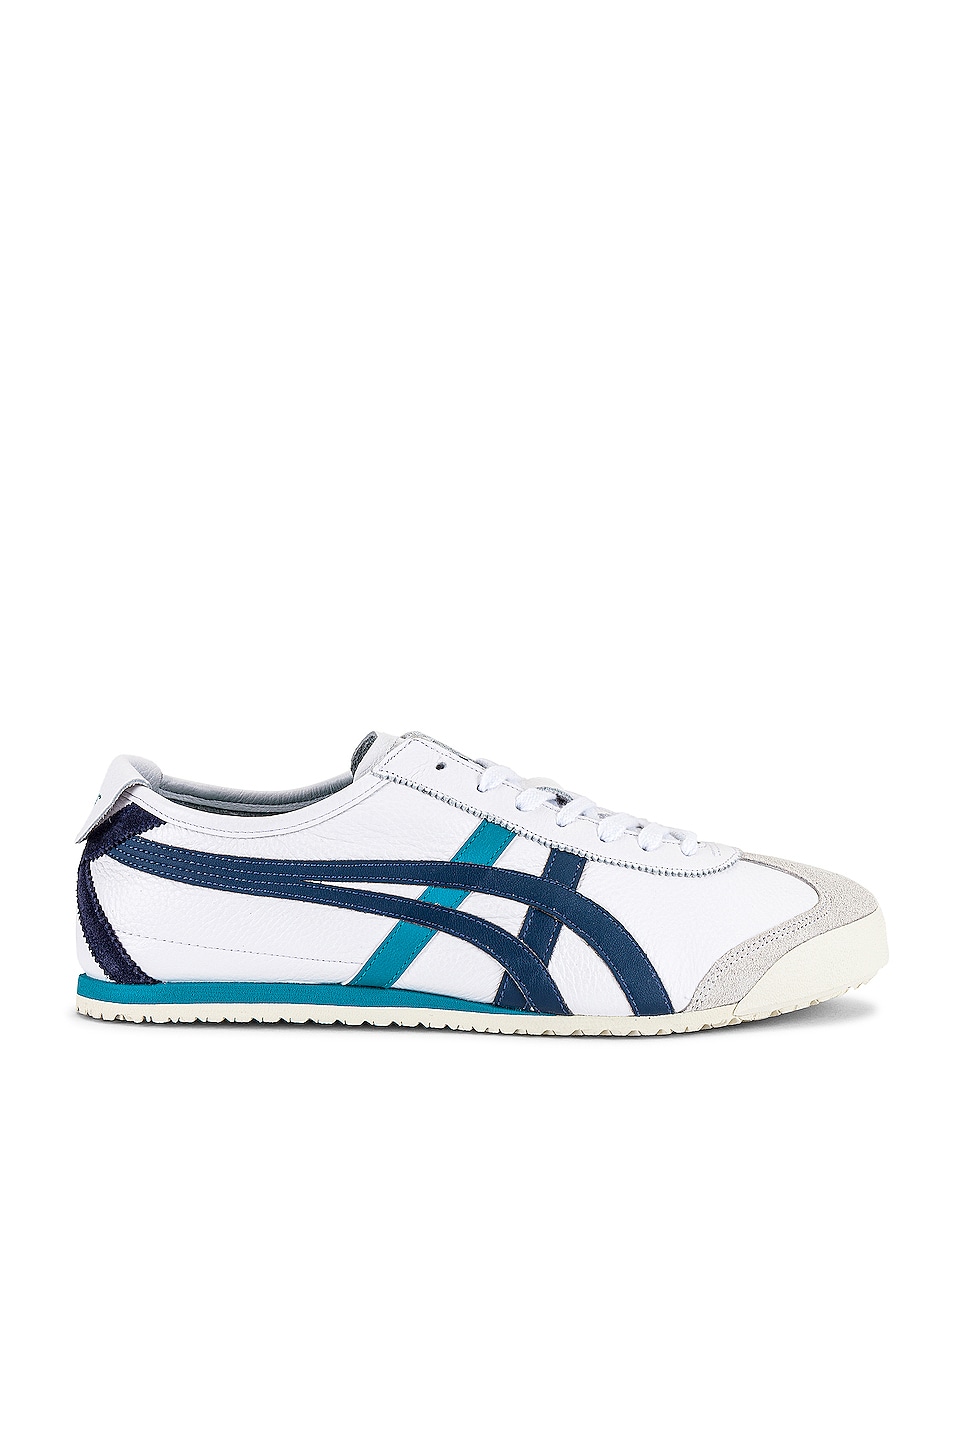 ONITSUKA TIGER MEXICO 66 DL408-1659 | atelier-yuwa.ciao.jp